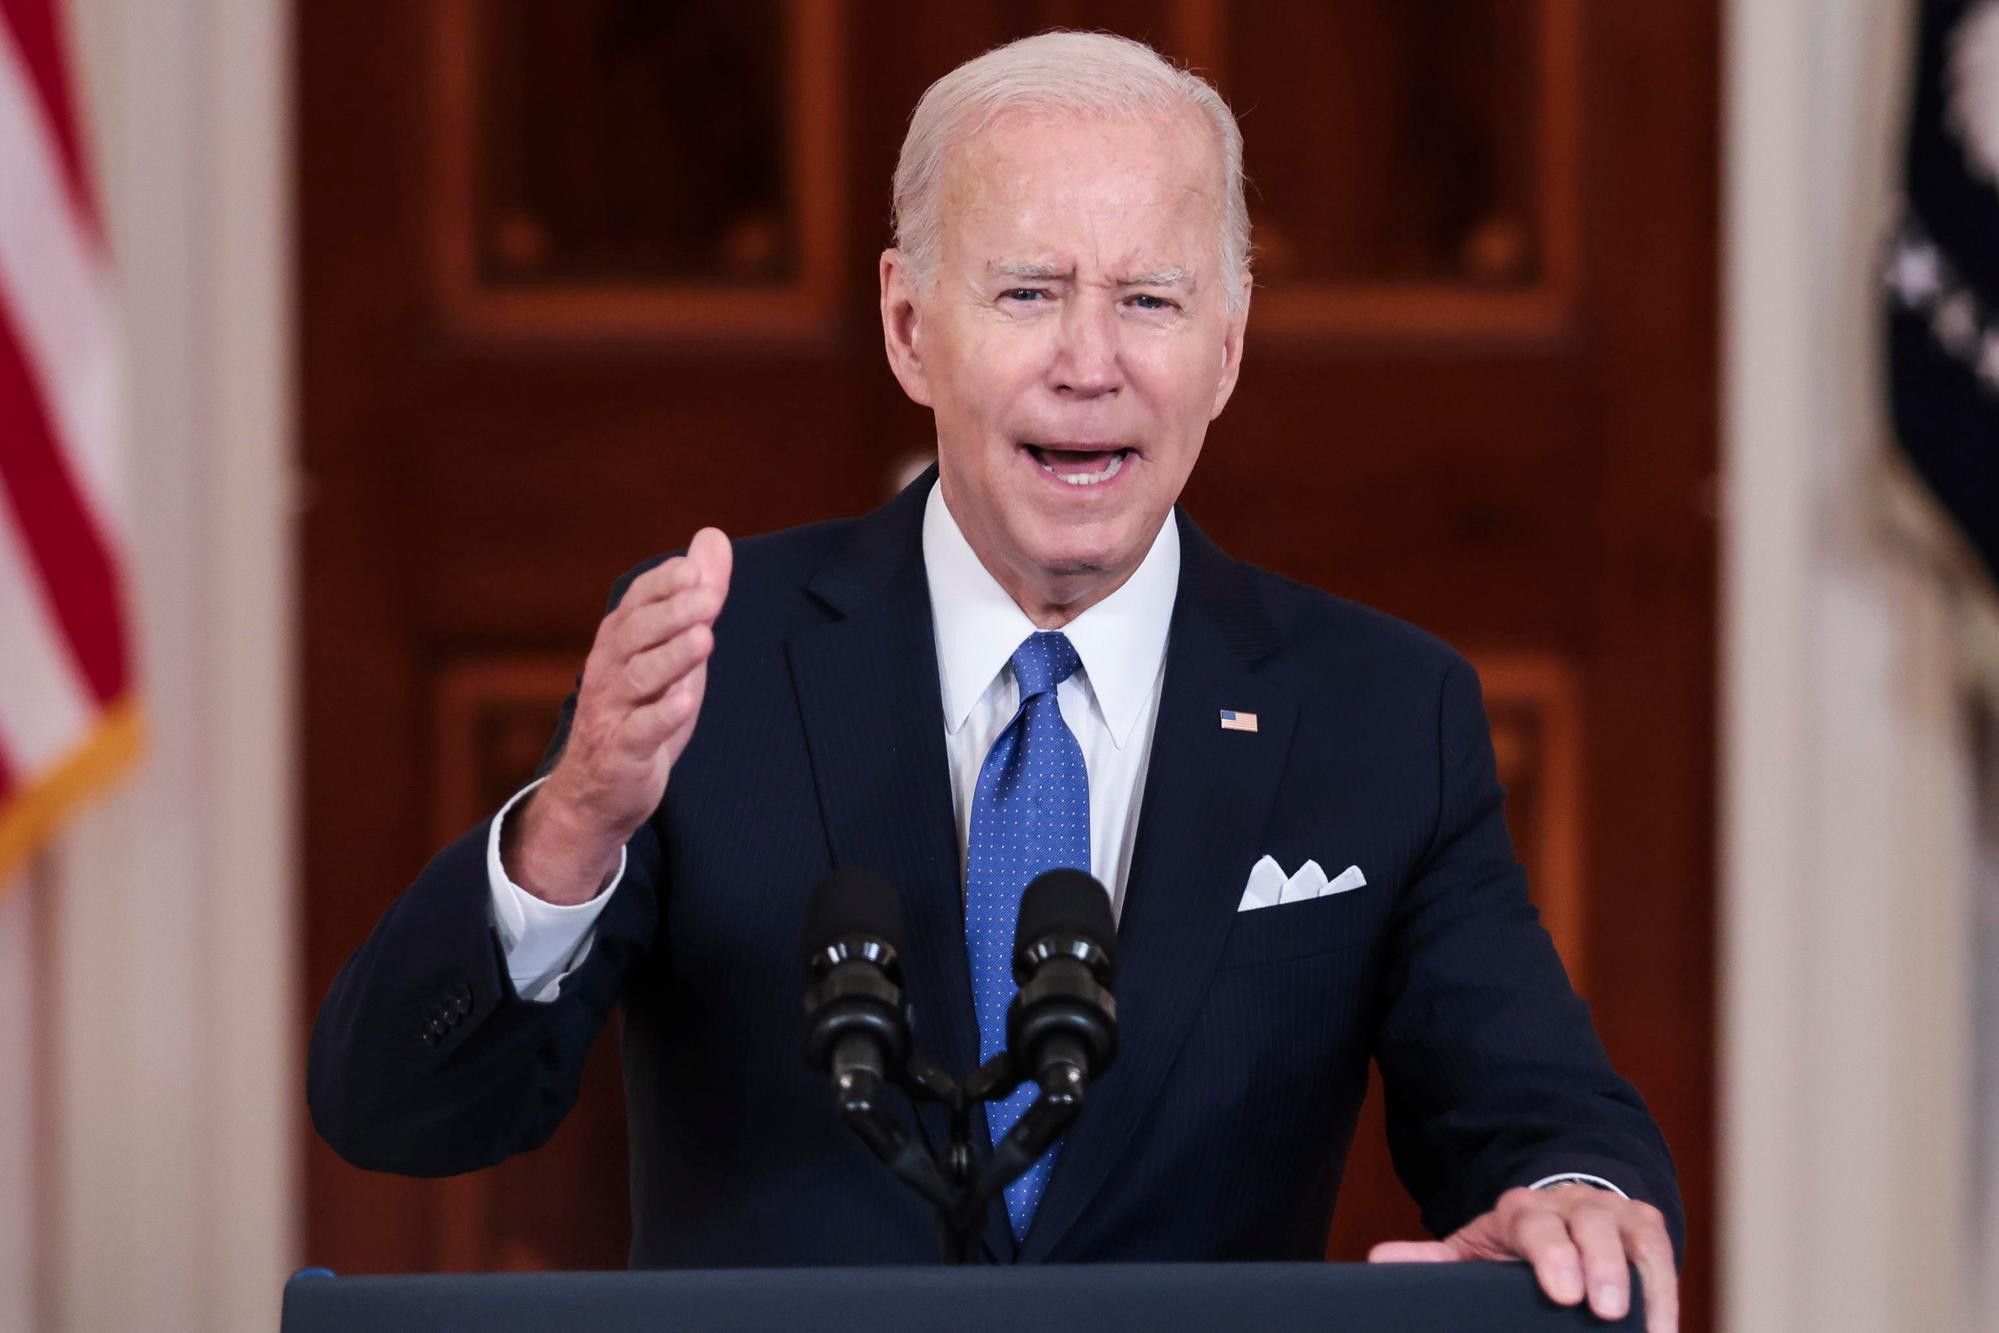 Abortion, Biden: &quot;A sad day for America, keep protests peaceful&quot;